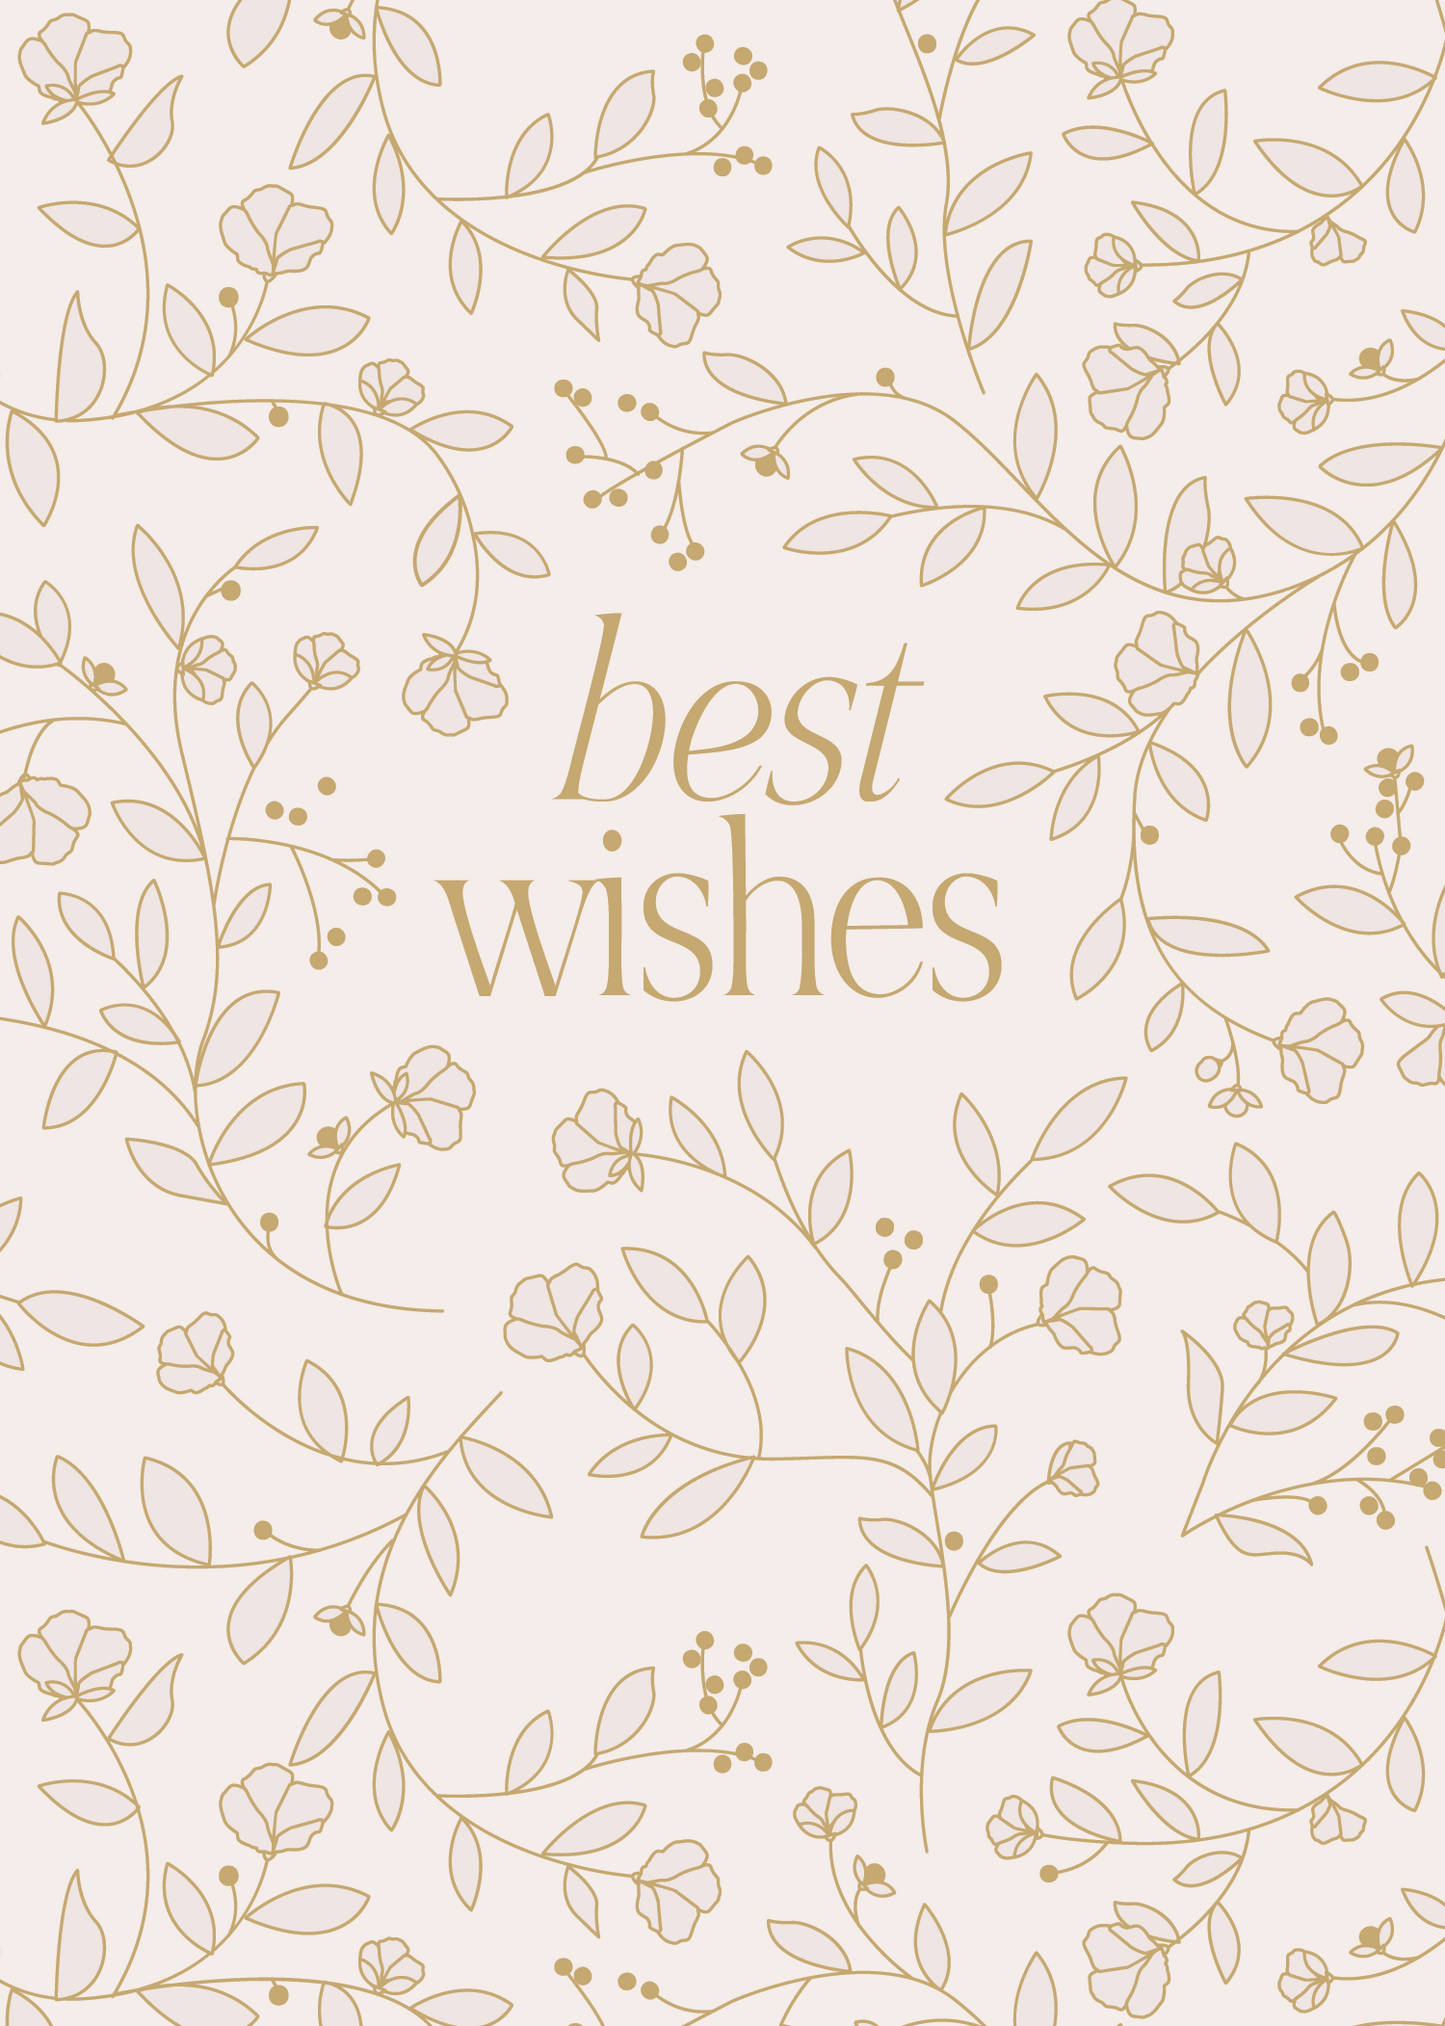 Greeting Card Blushing Floral- Best Wishes